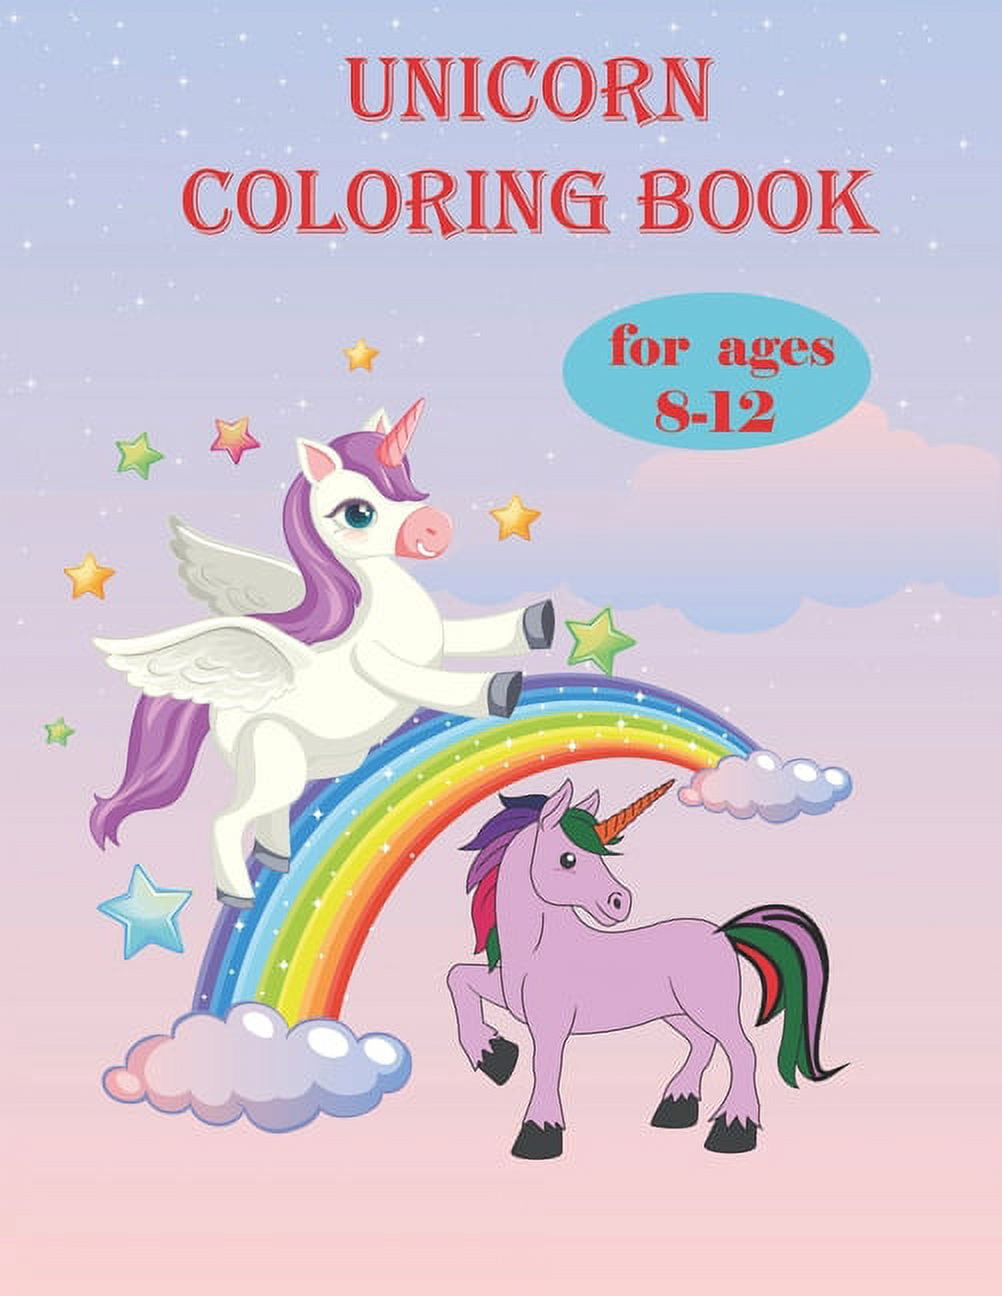 Unicorn Coloring Book: Coloring for children,tweens and teenagers,ages 7  and up.Core age 8-12 years old.Use:kids arts & crafts,travel activity,girls